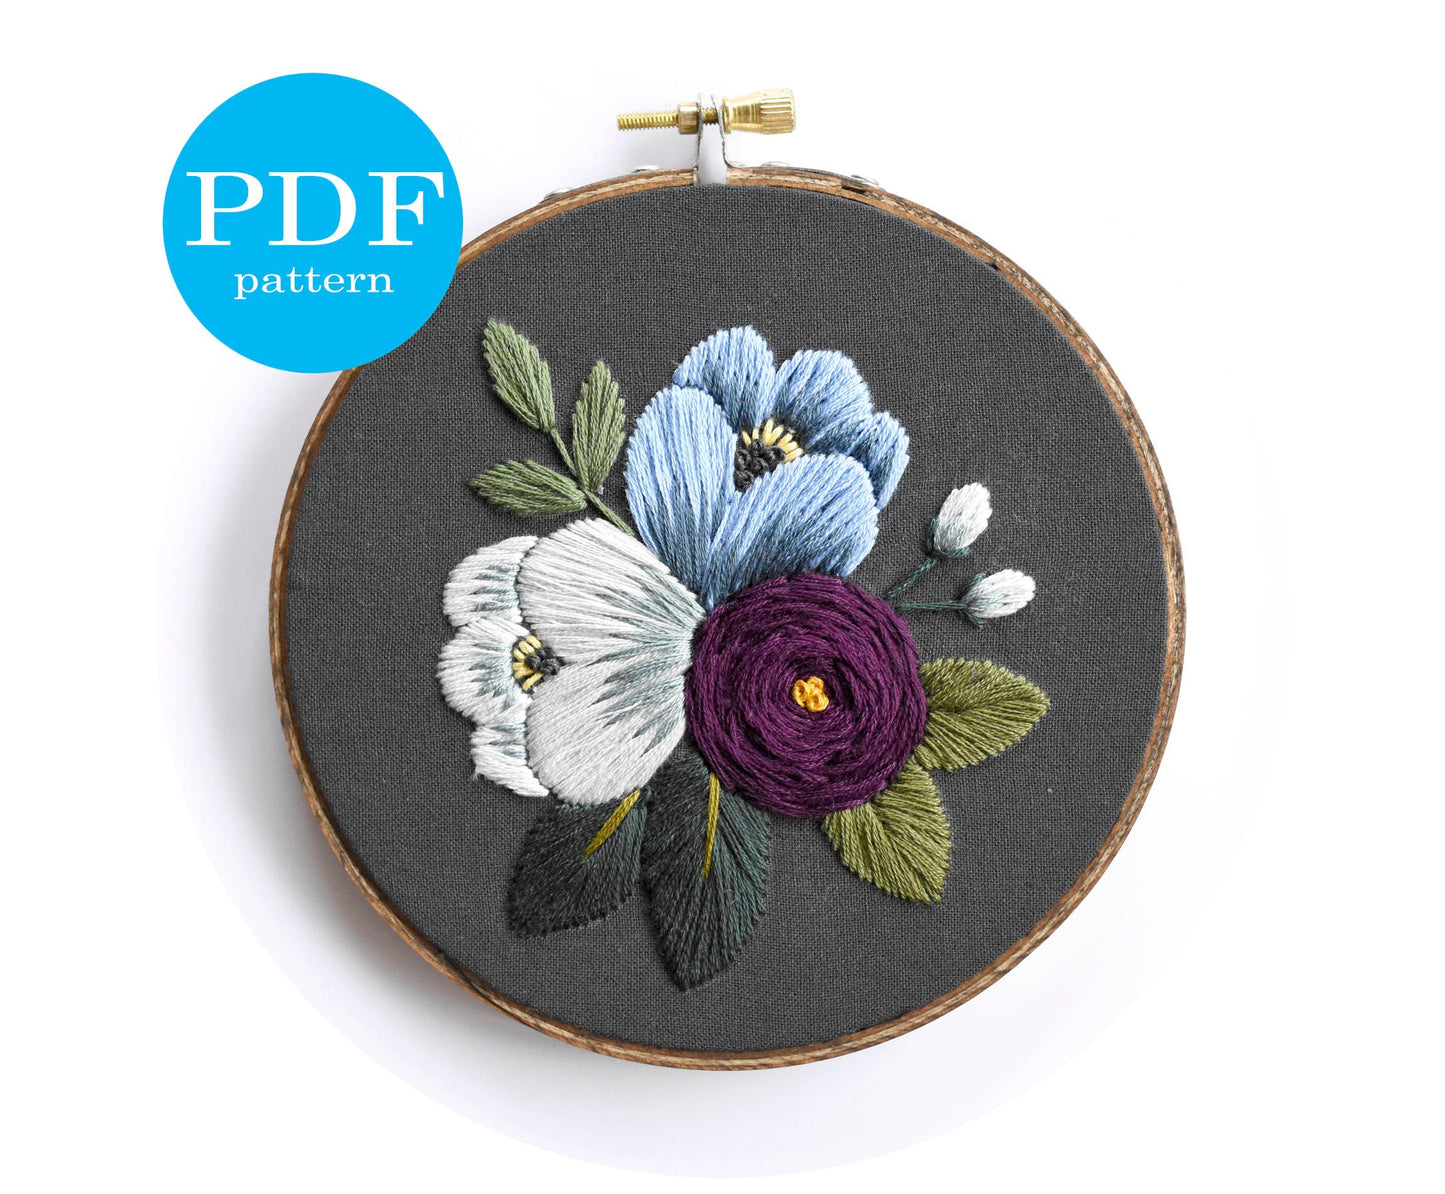 Tulip Embroidery Pattern. Digital Download. 5" embroidery hoop. DIY Home Decor. Beginner Embroidery pattern. Flower embroidery pattern.